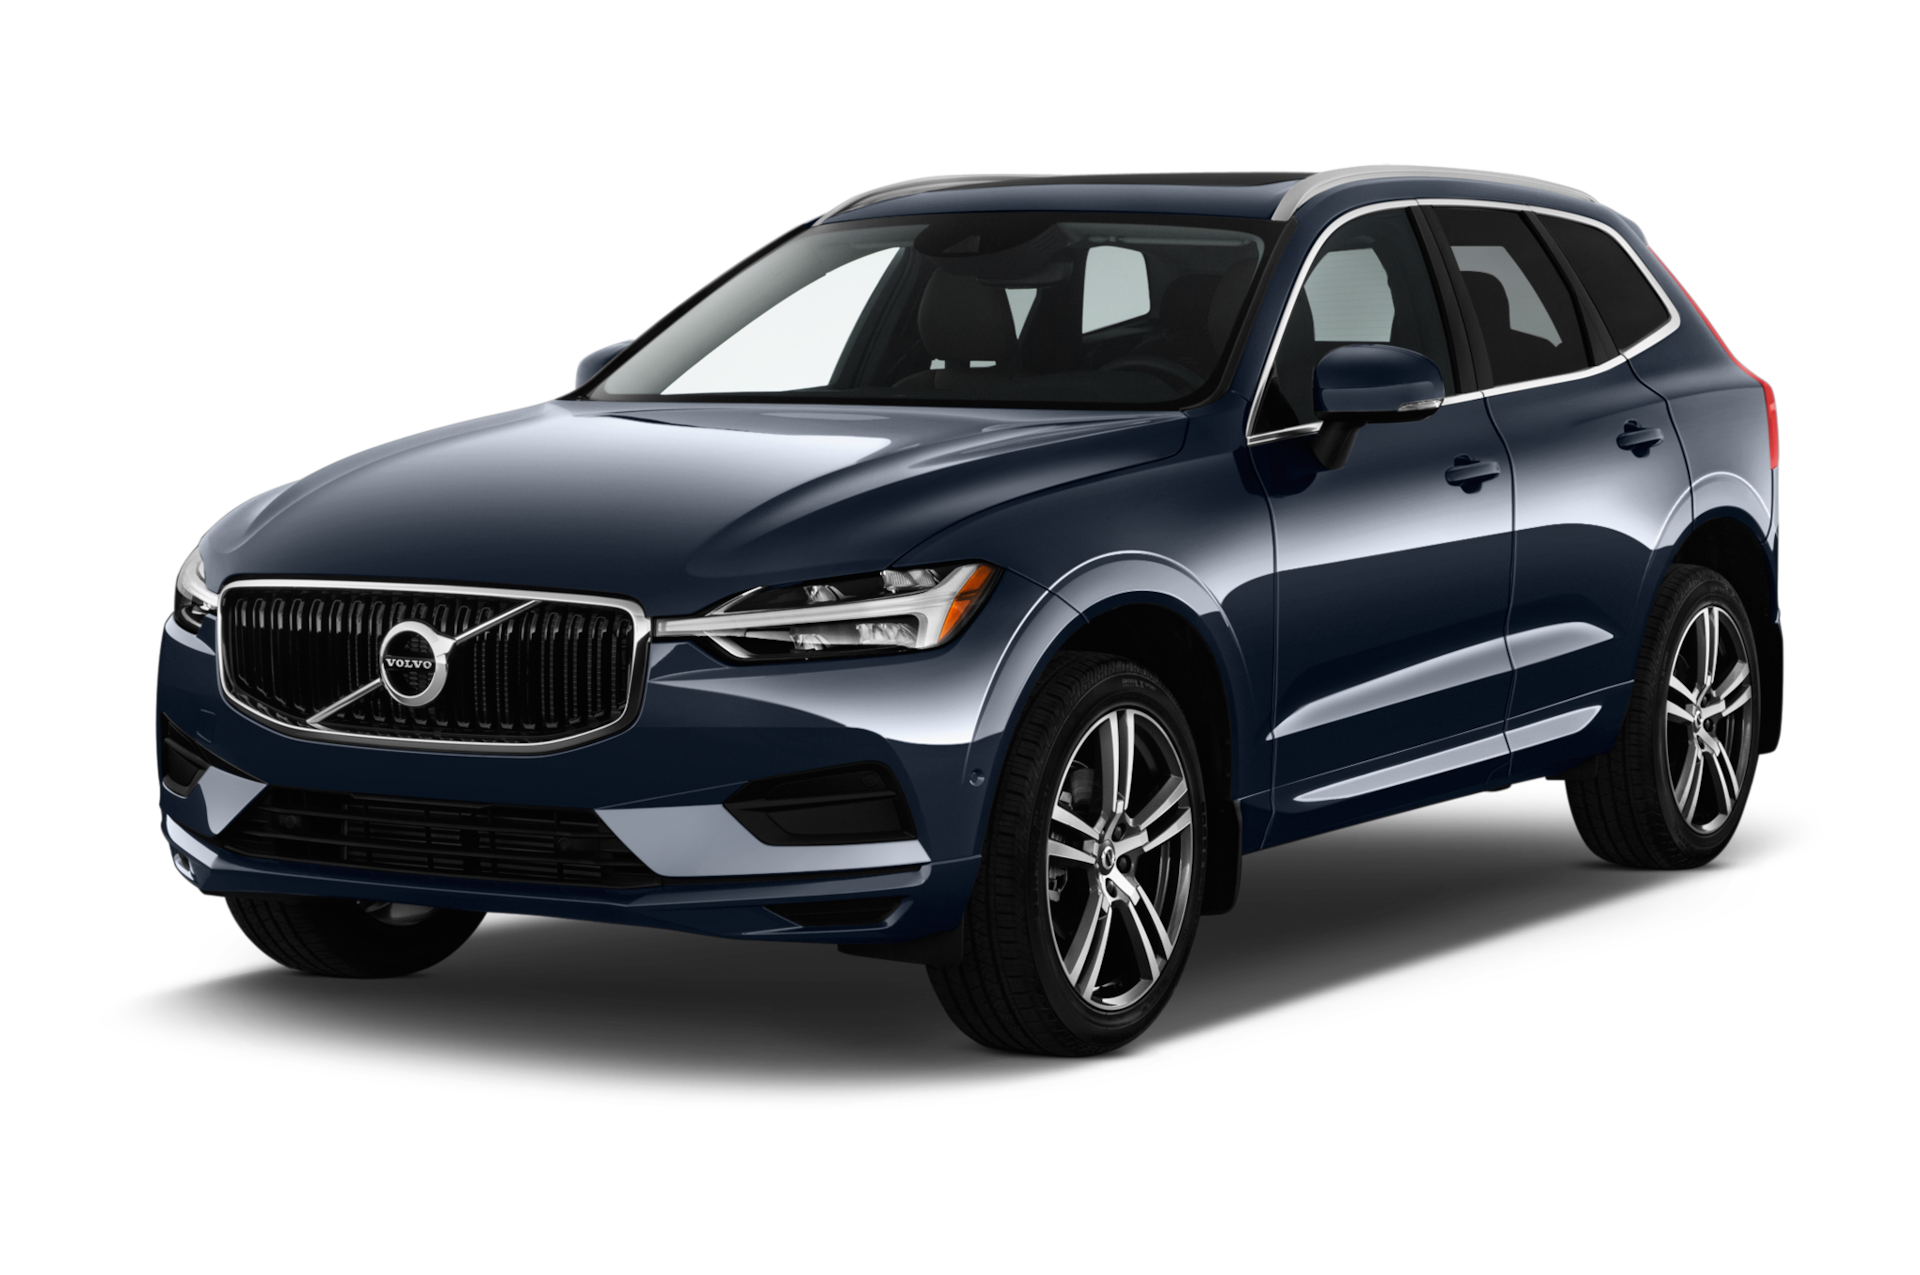 2020 Volvo XC60 Prices, Reviews, and Photos - MotorTrend